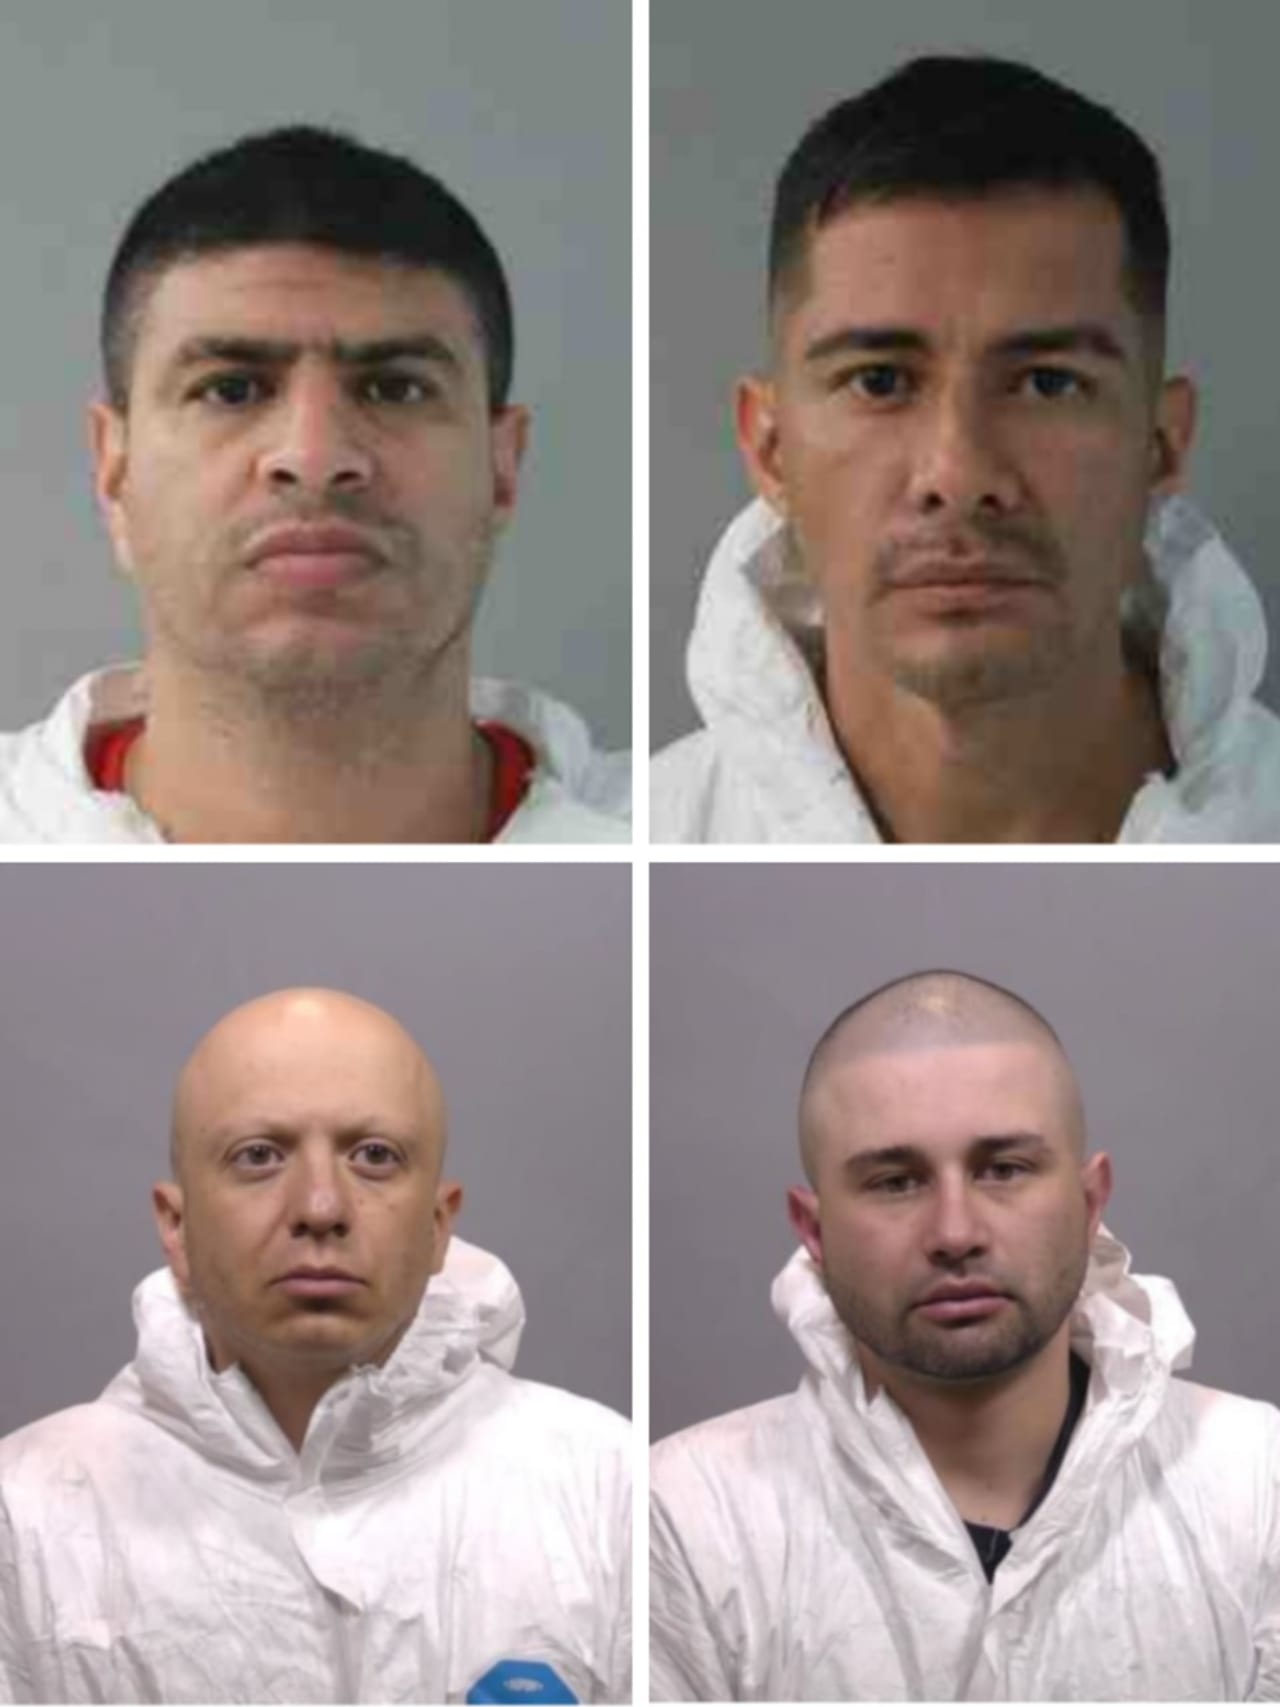 The four men charged with targeting Asian American business owners include, clockwise from top left: Diego Martinez Franco Alexander, John J. Carmona Artega, Jose Javier Garcia Ortega, Victor Alfonso Lopez Restrepo.